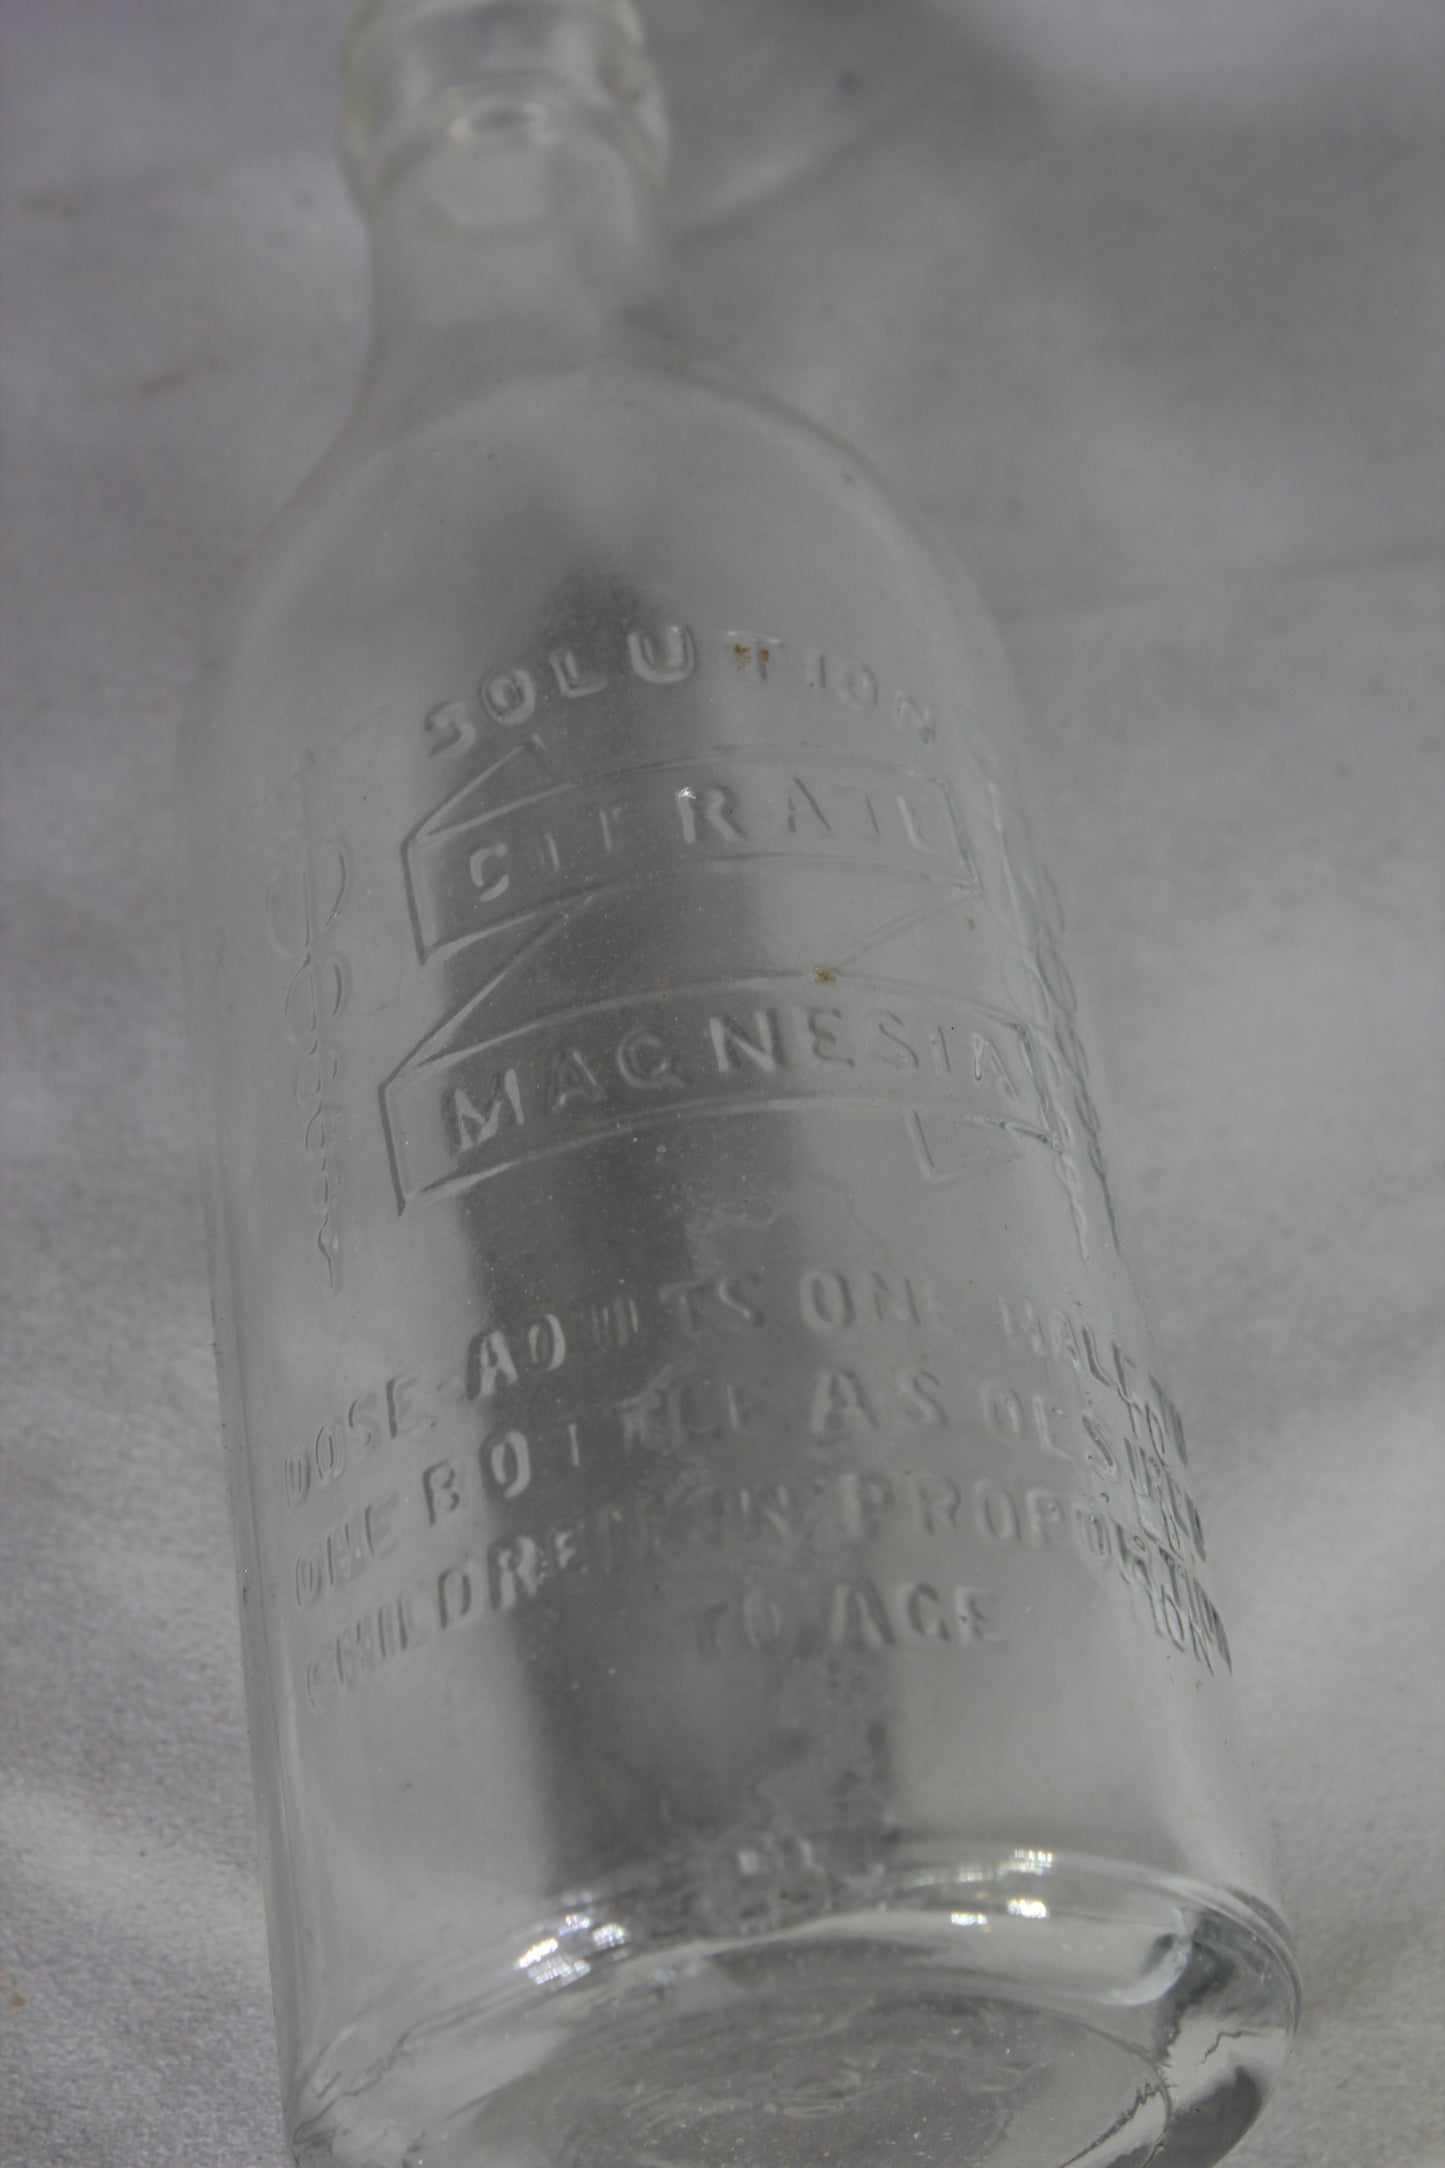 Citrate Magnesia Solution Apothecary Bottle